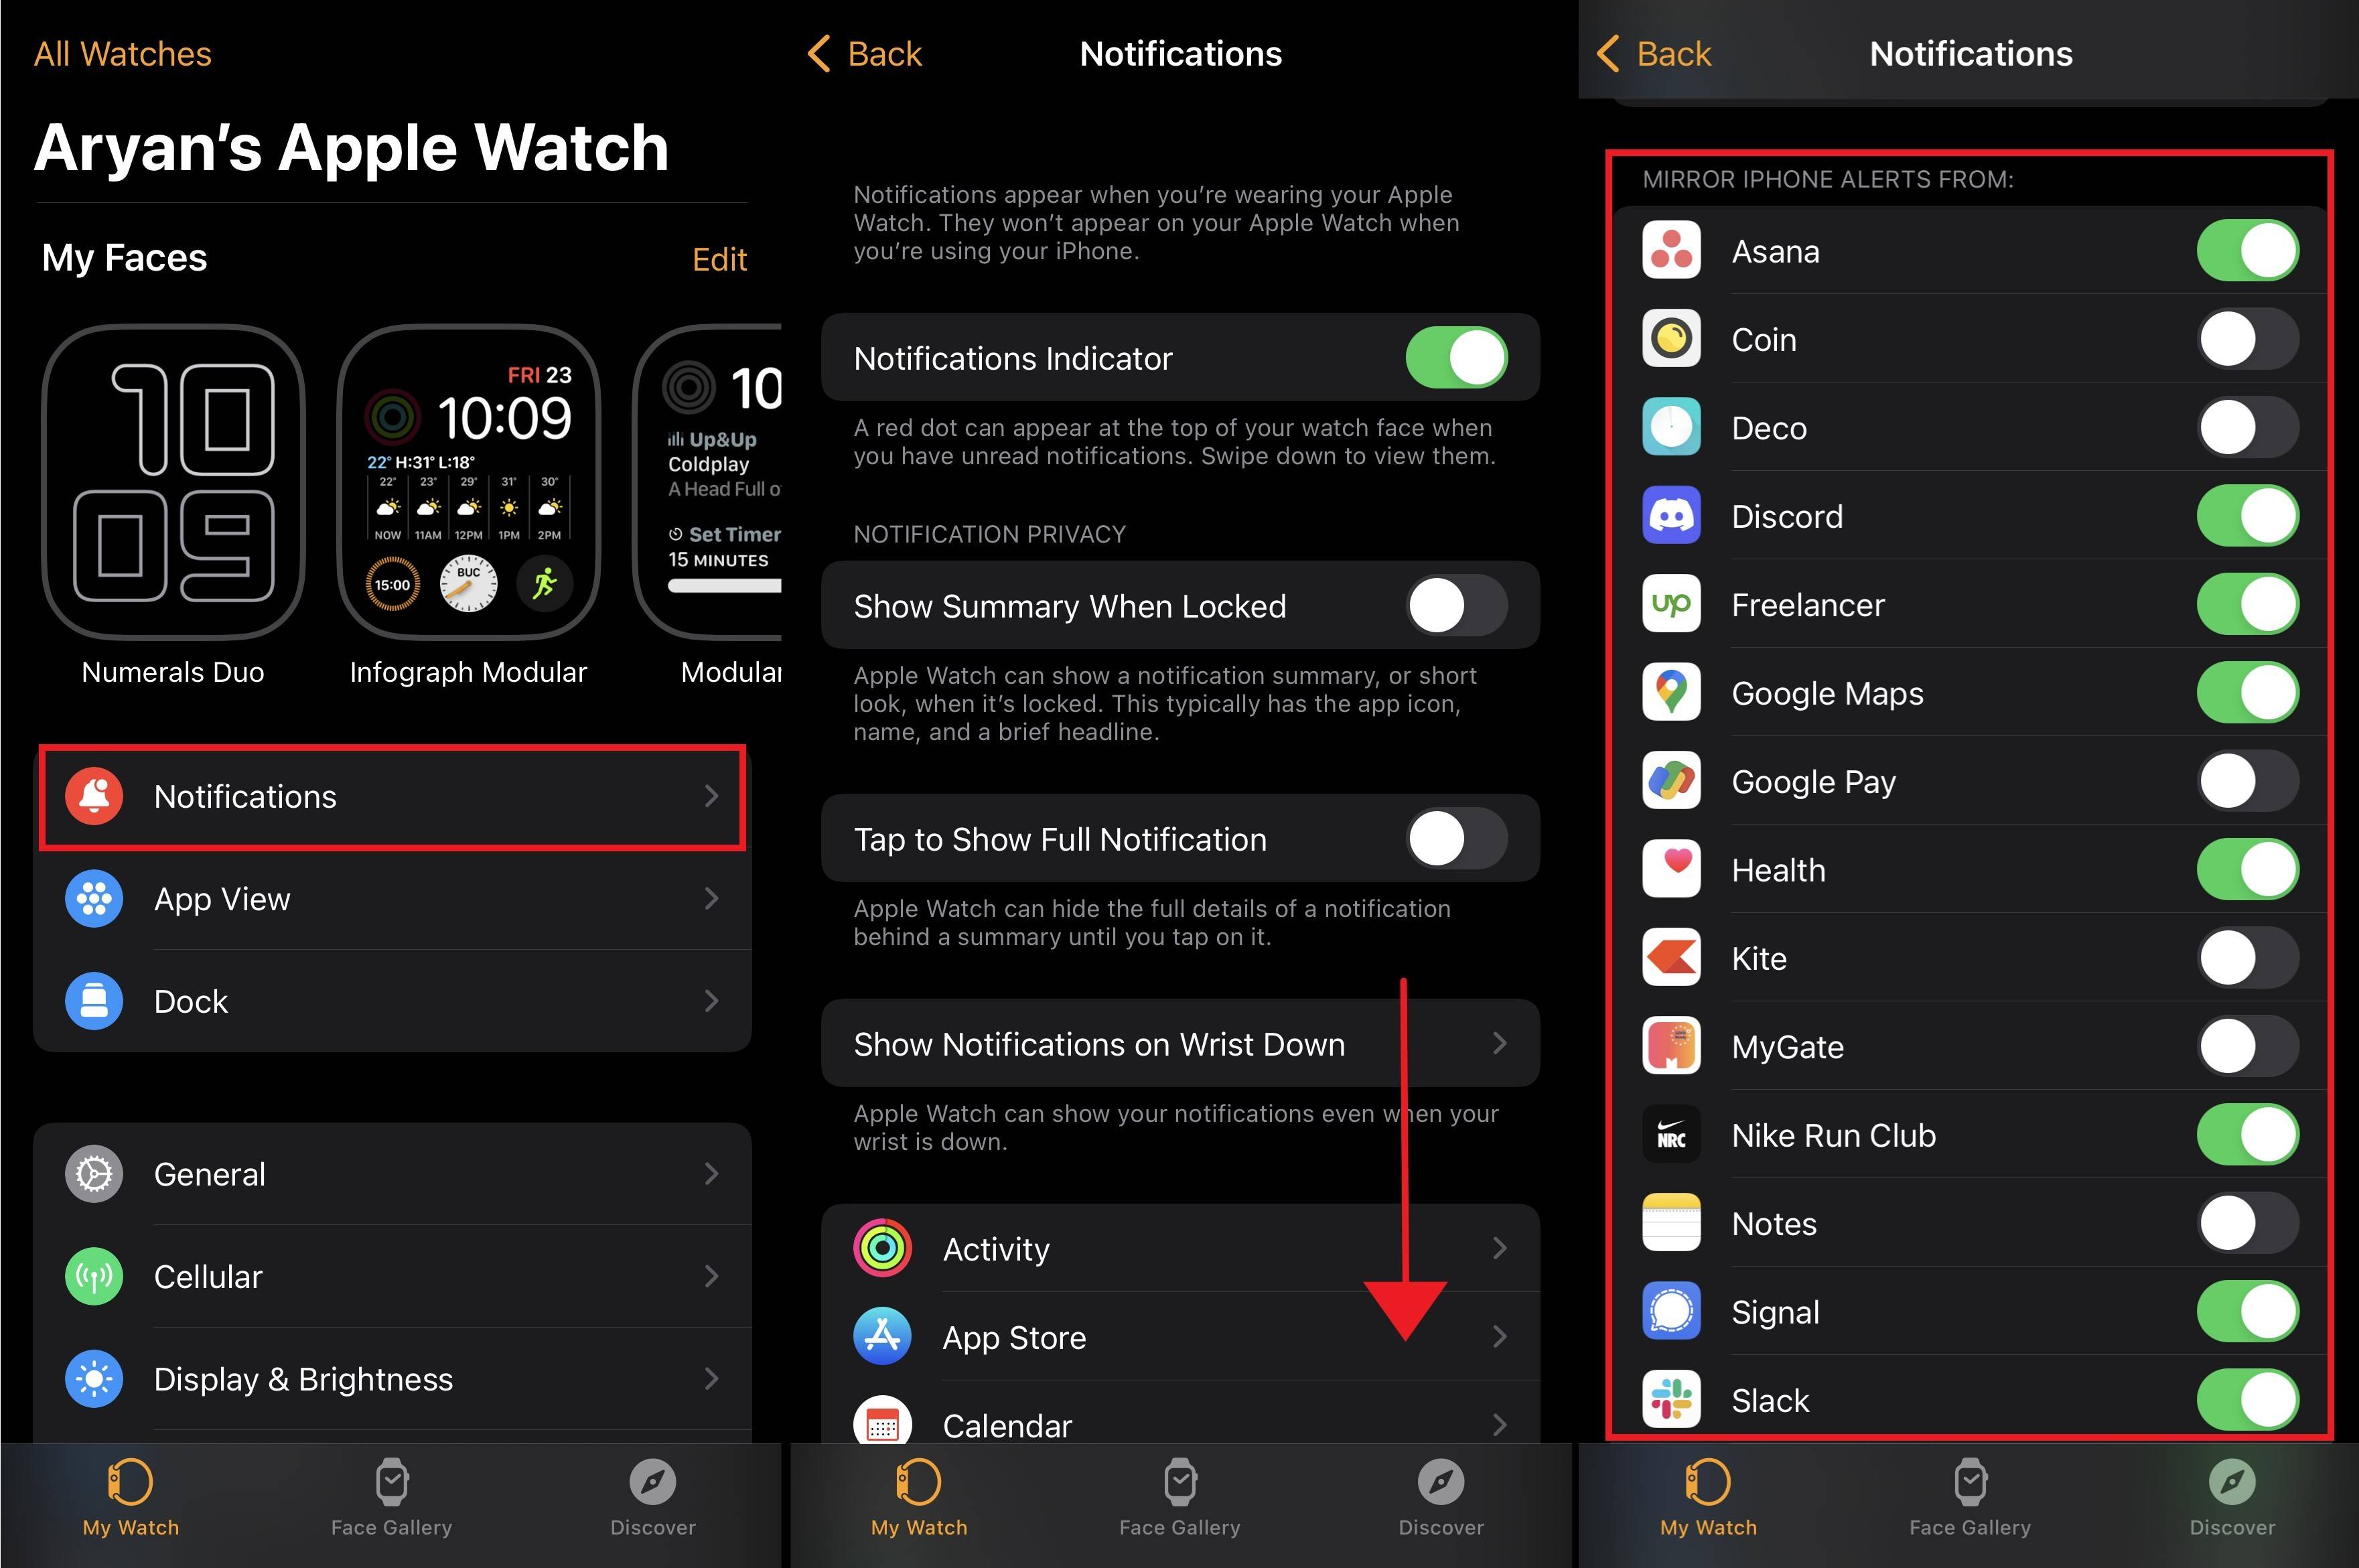 Steps to configure Apple Watch Notifications